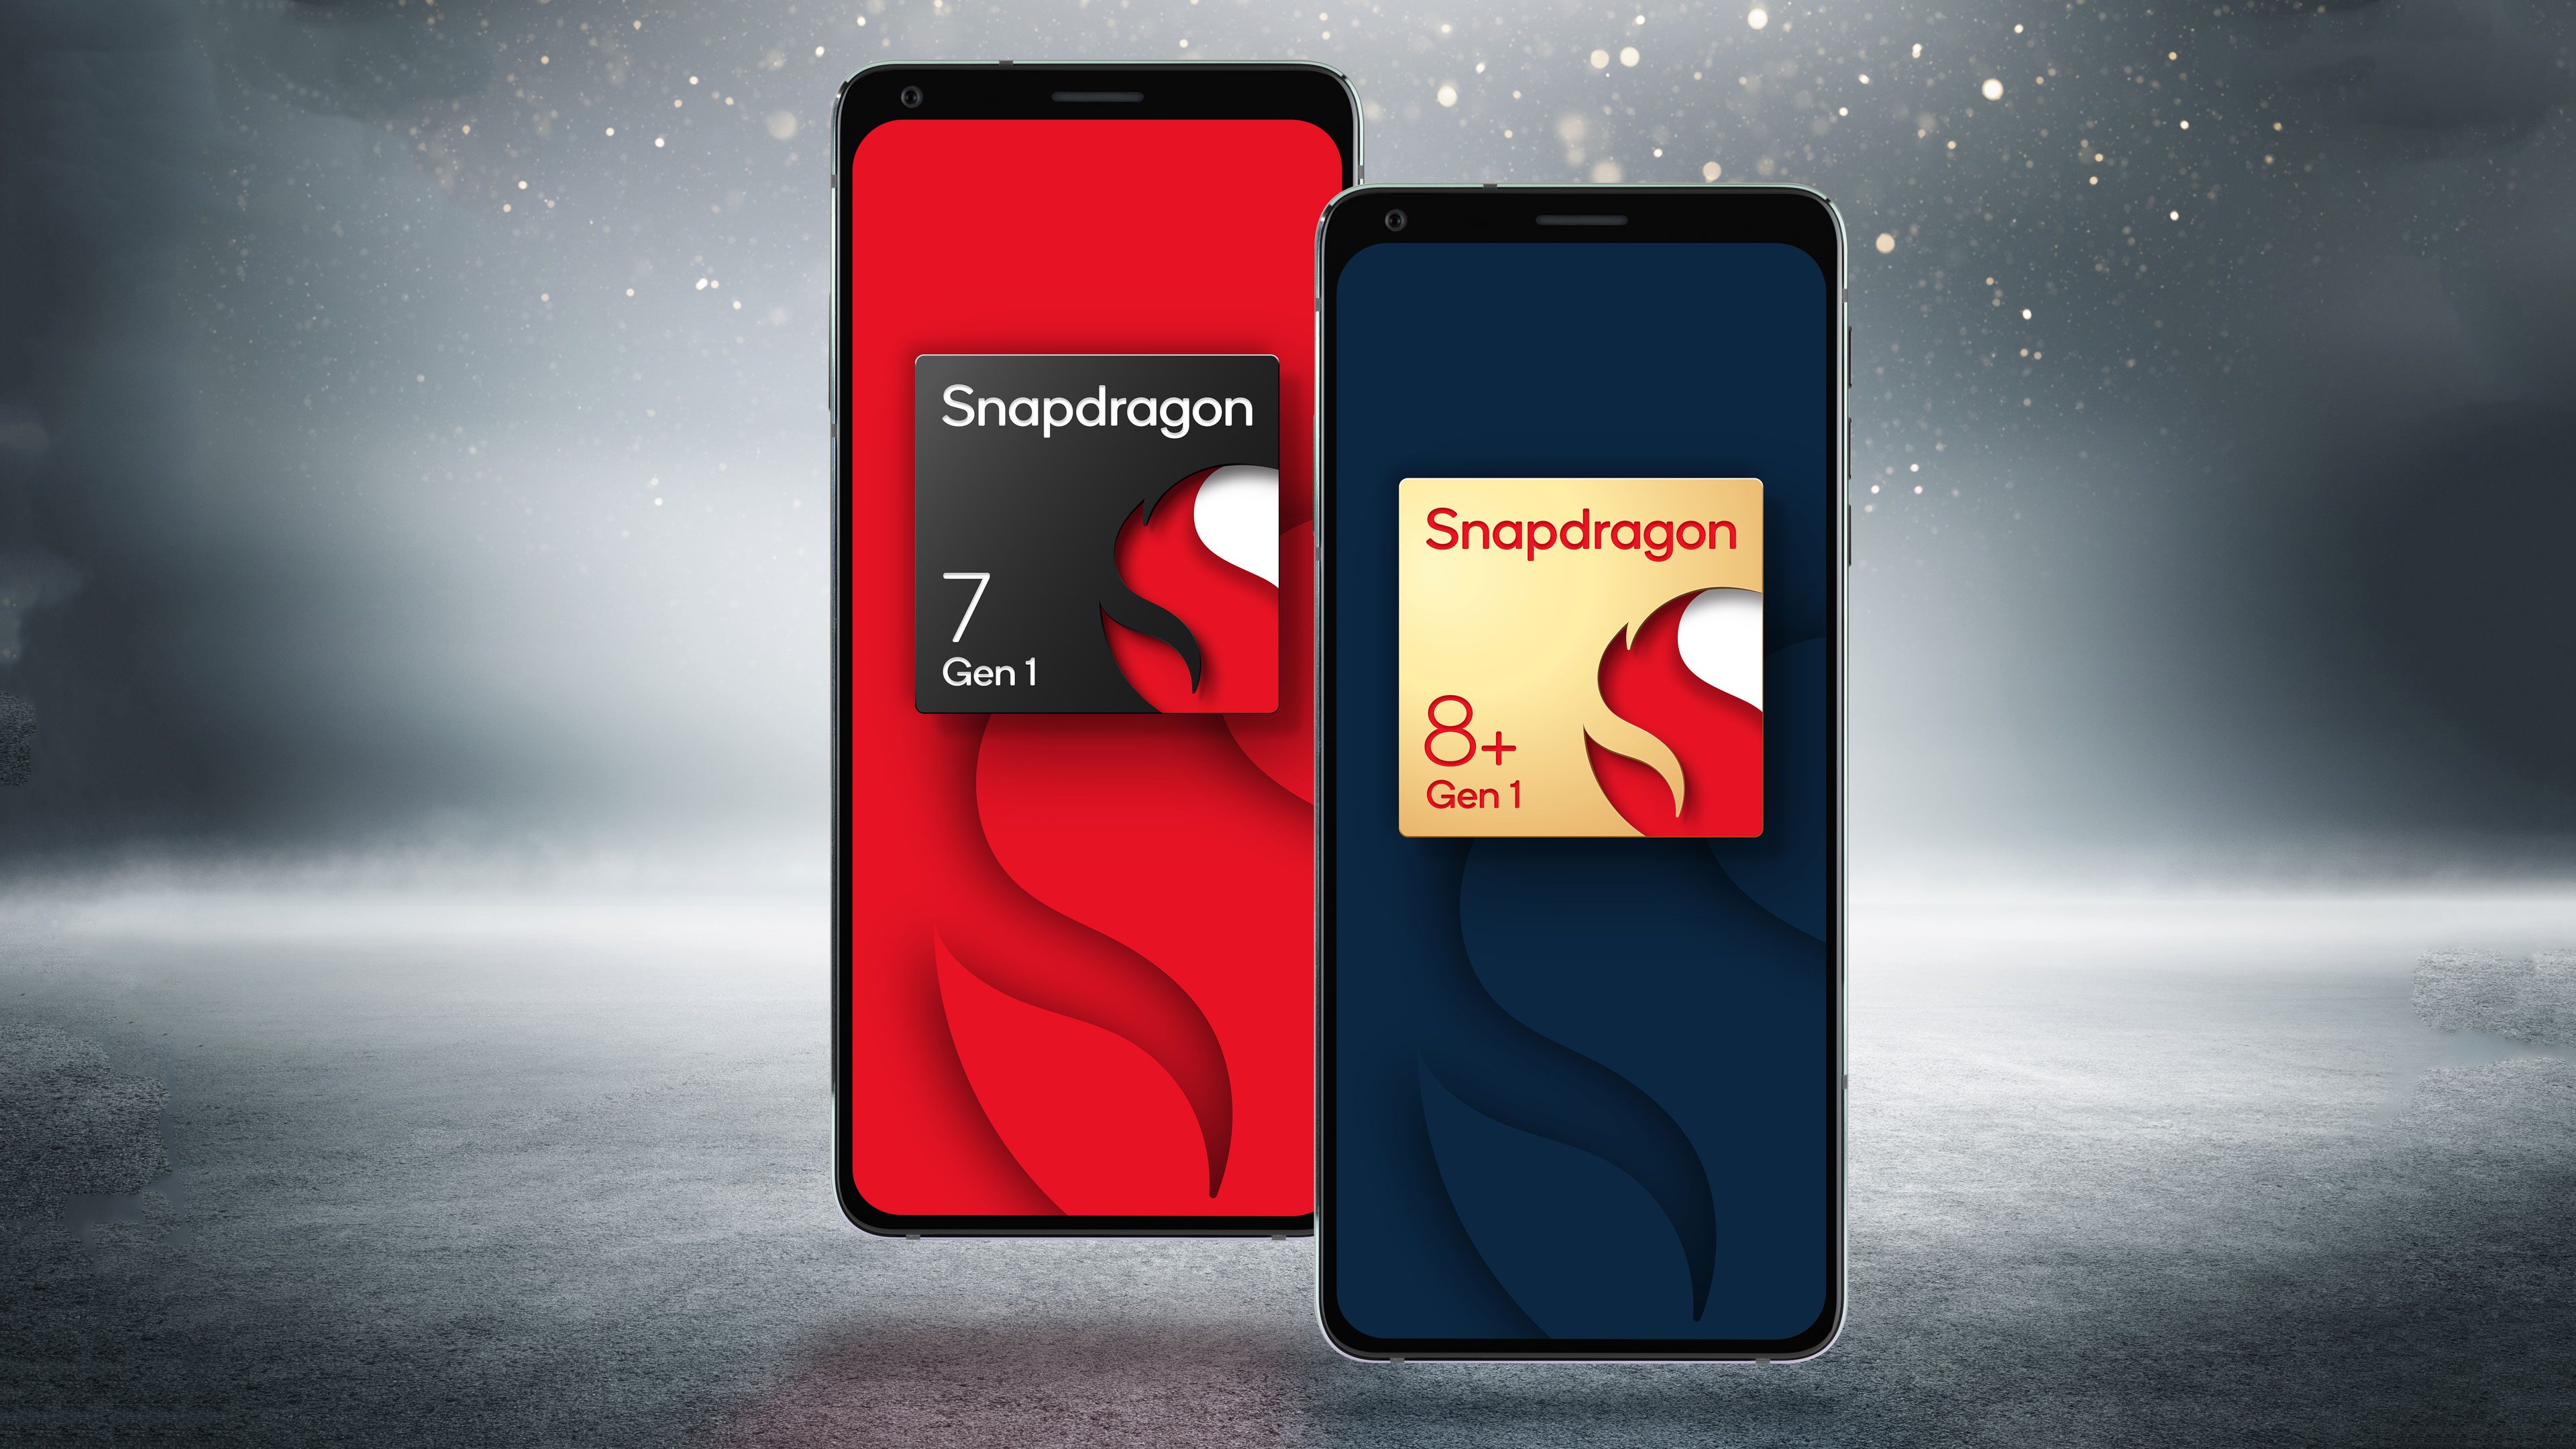 Snapdragon 8 Gen 3 SoC will also have its own for Galaxy edition :  r/samsunggalaxy